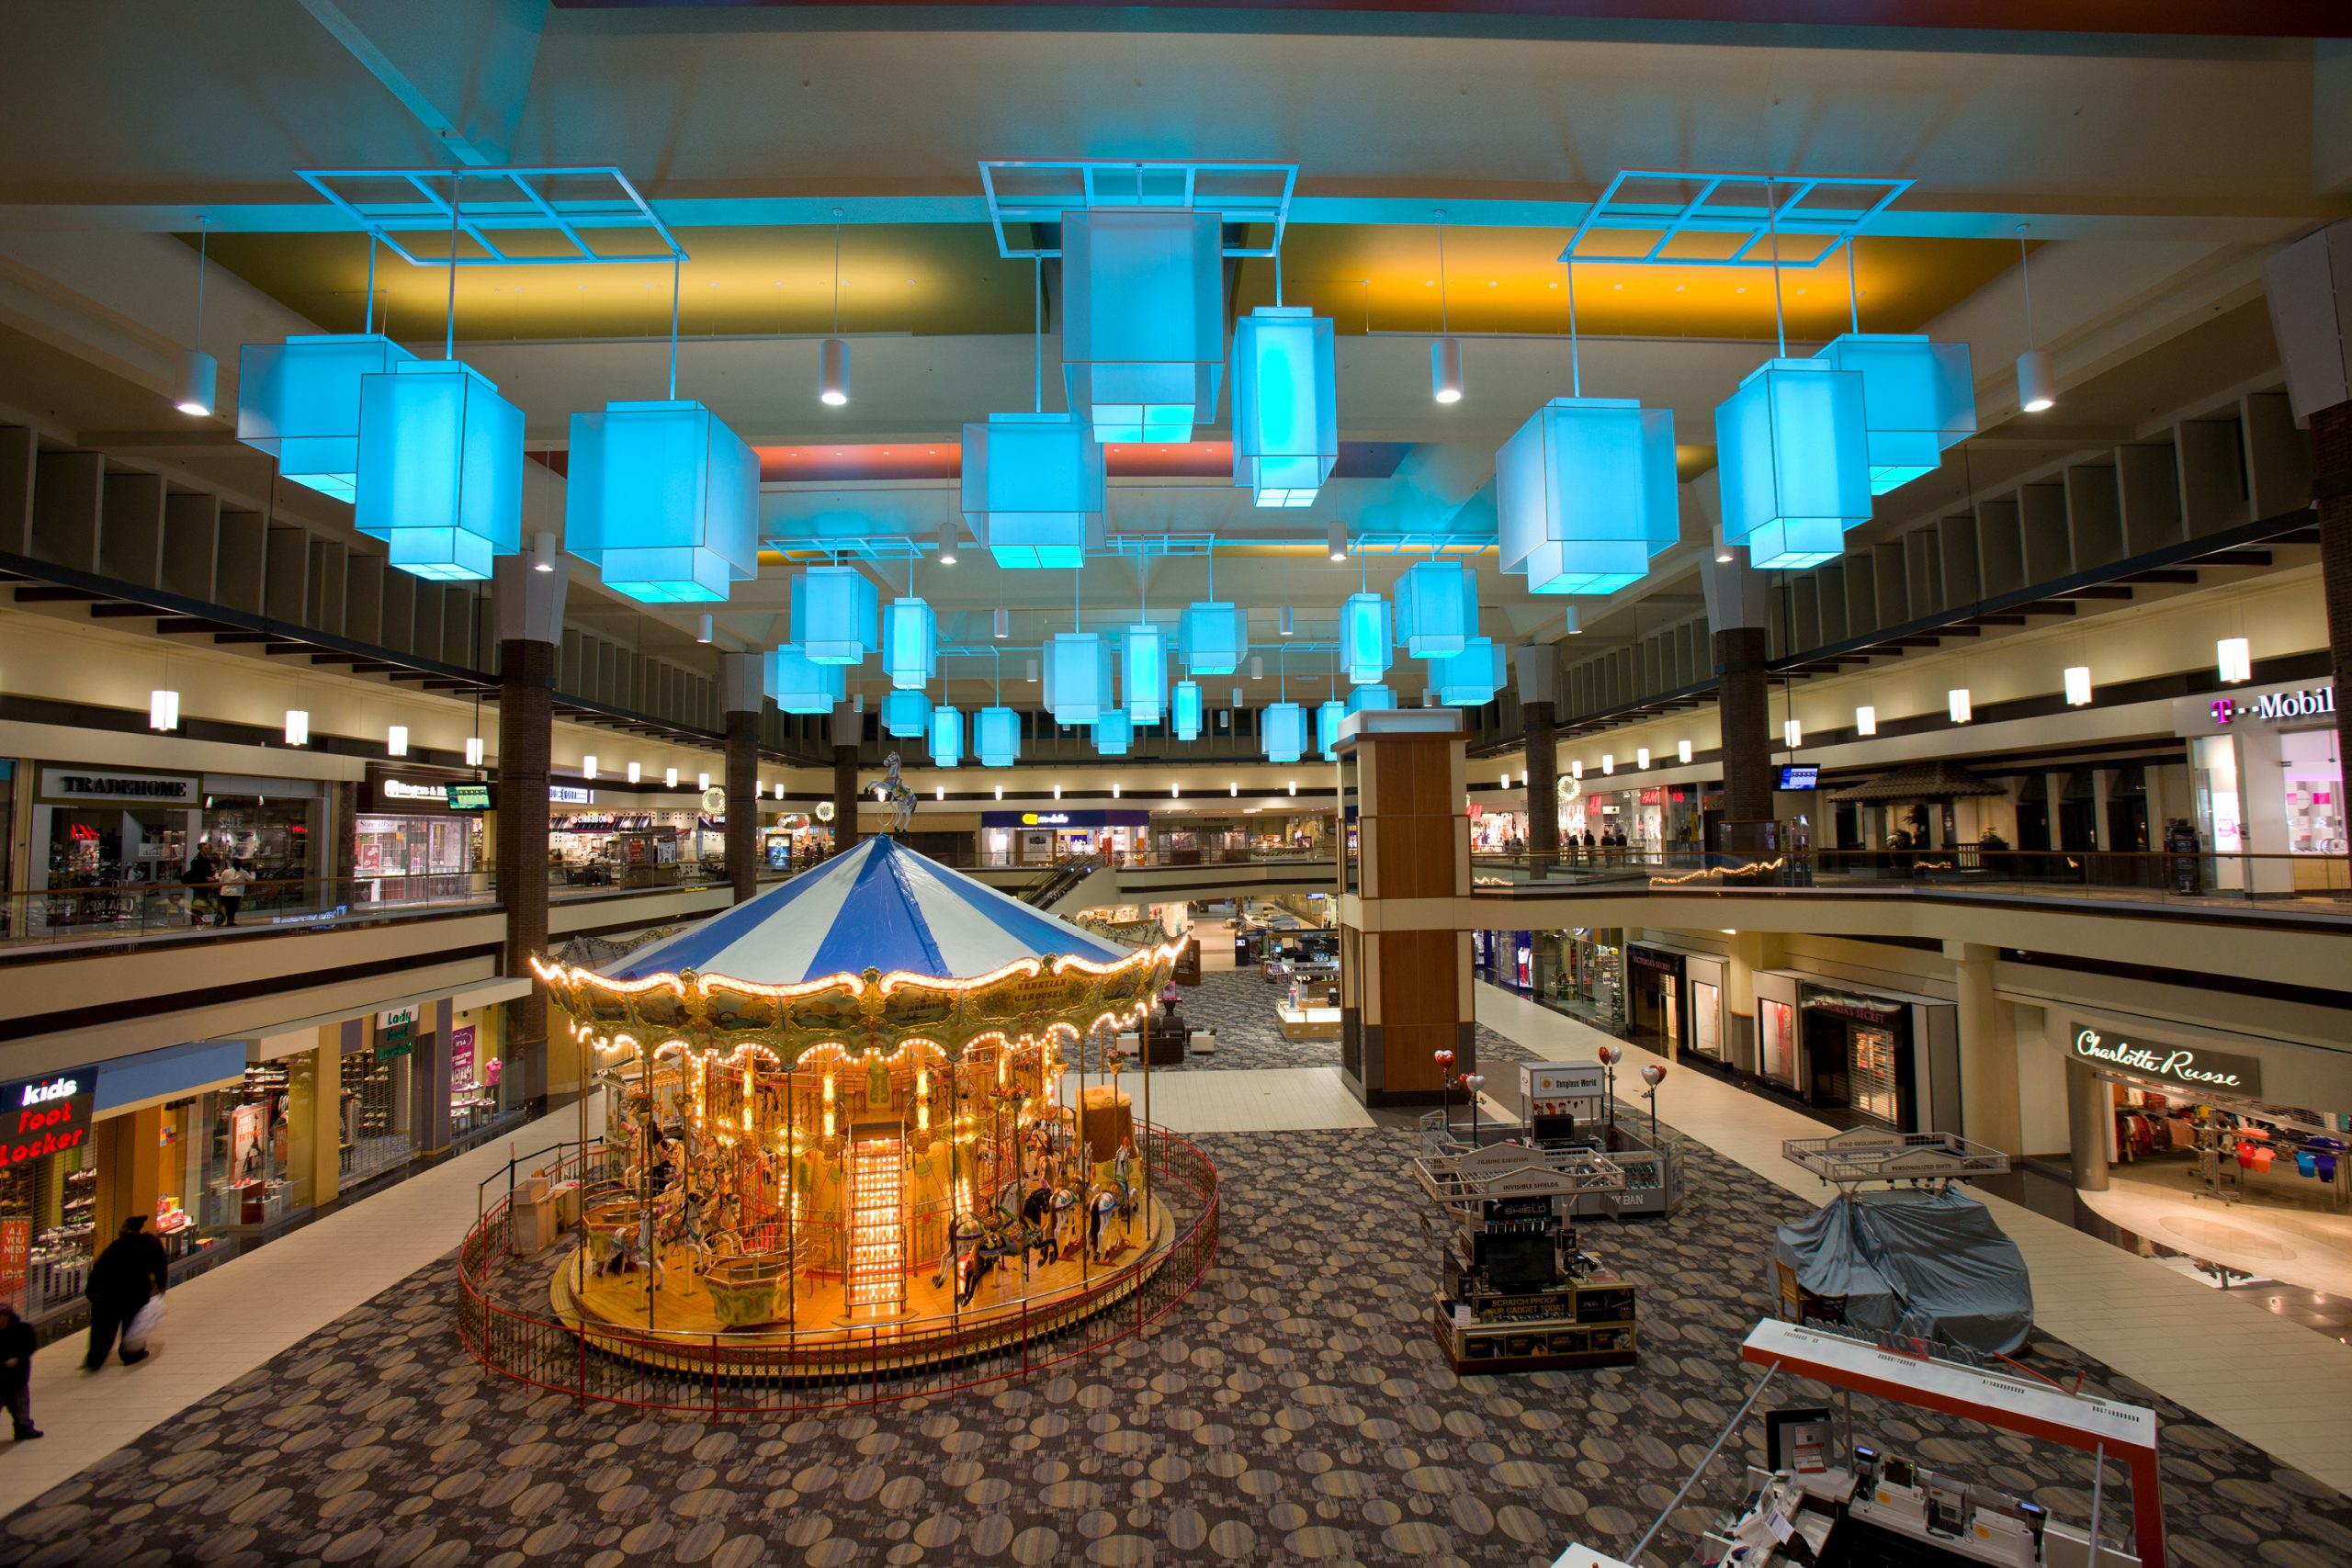 Maplewood Mall Boasts a Kaleidoscope of Polychromatic Color with